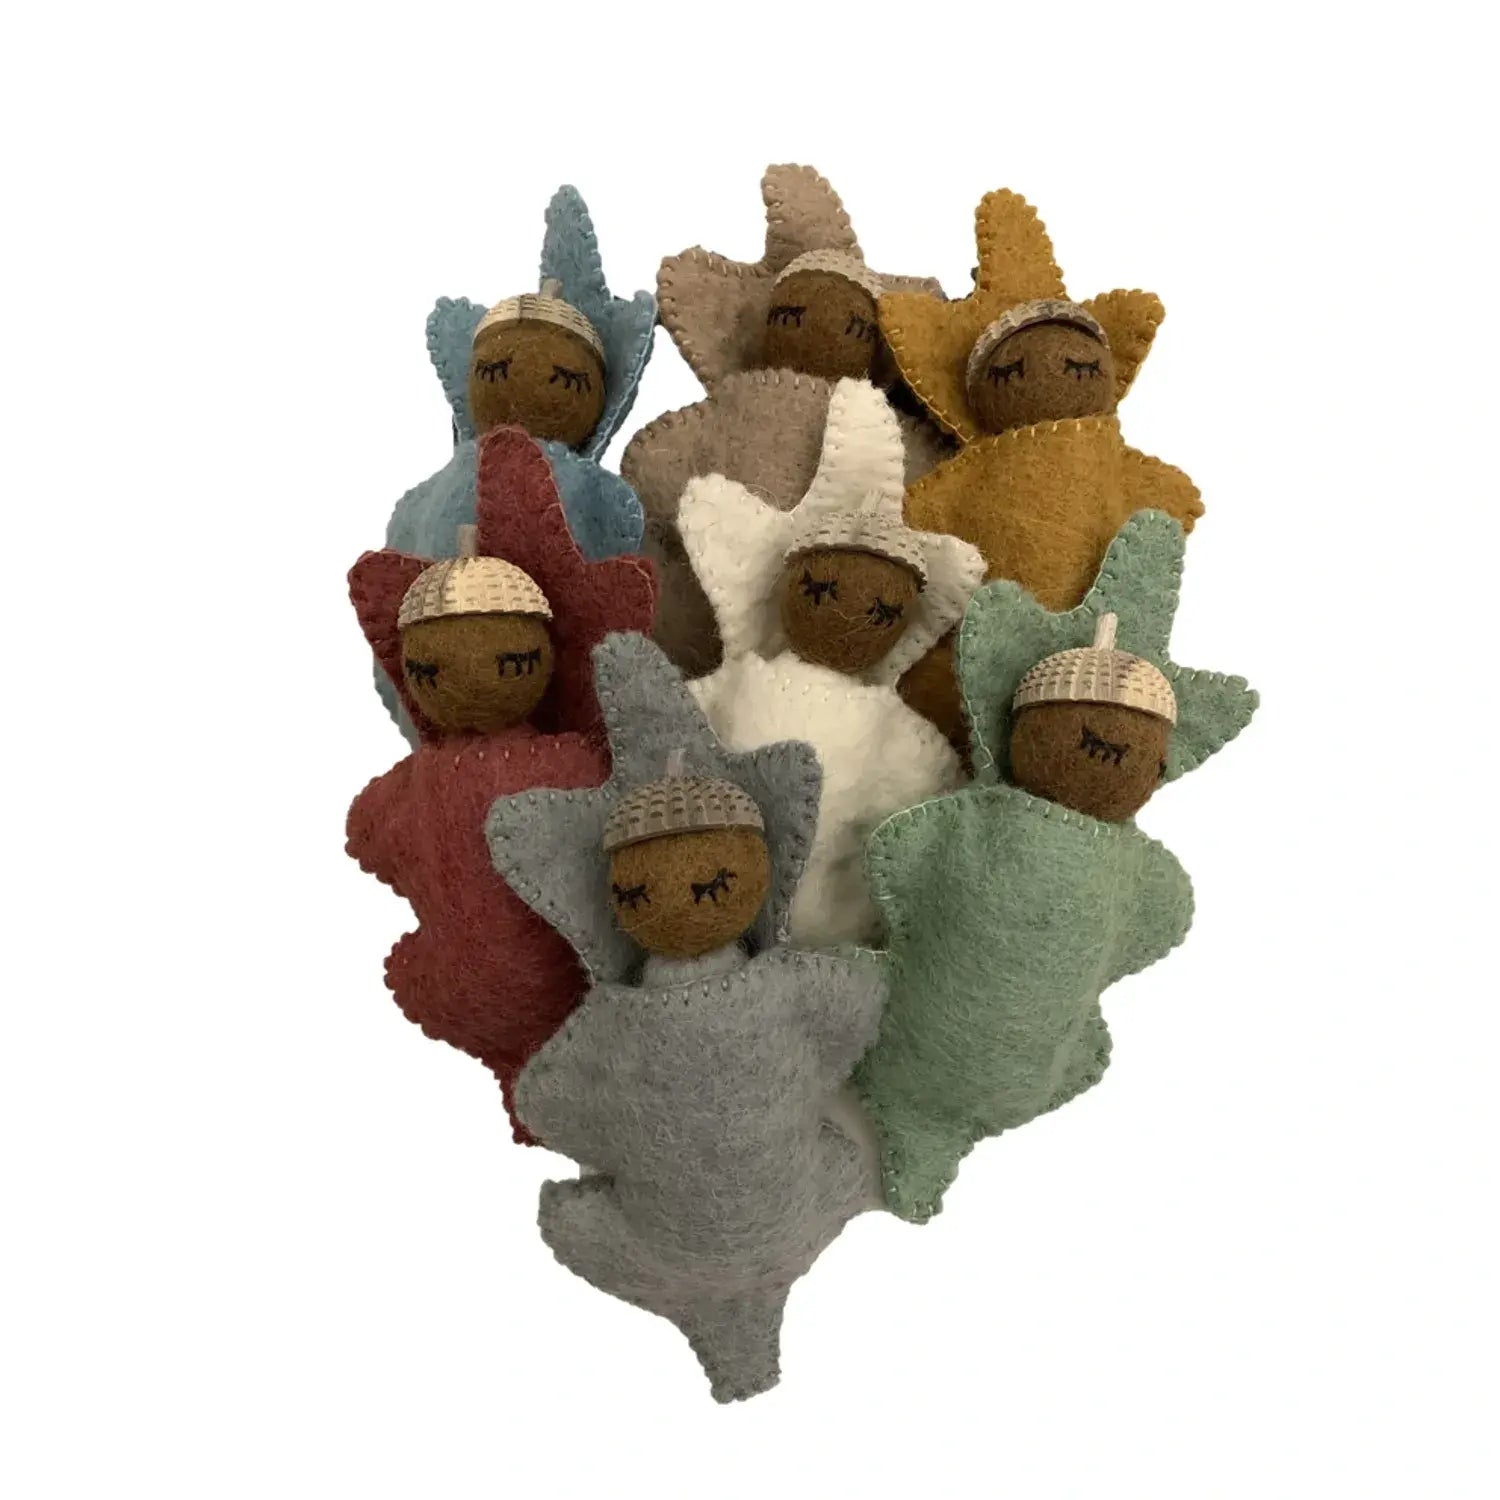 Earth Acorn Babies by Papoose ToysEarth Acorn Babies - Worry Dolls by Papoose Toys